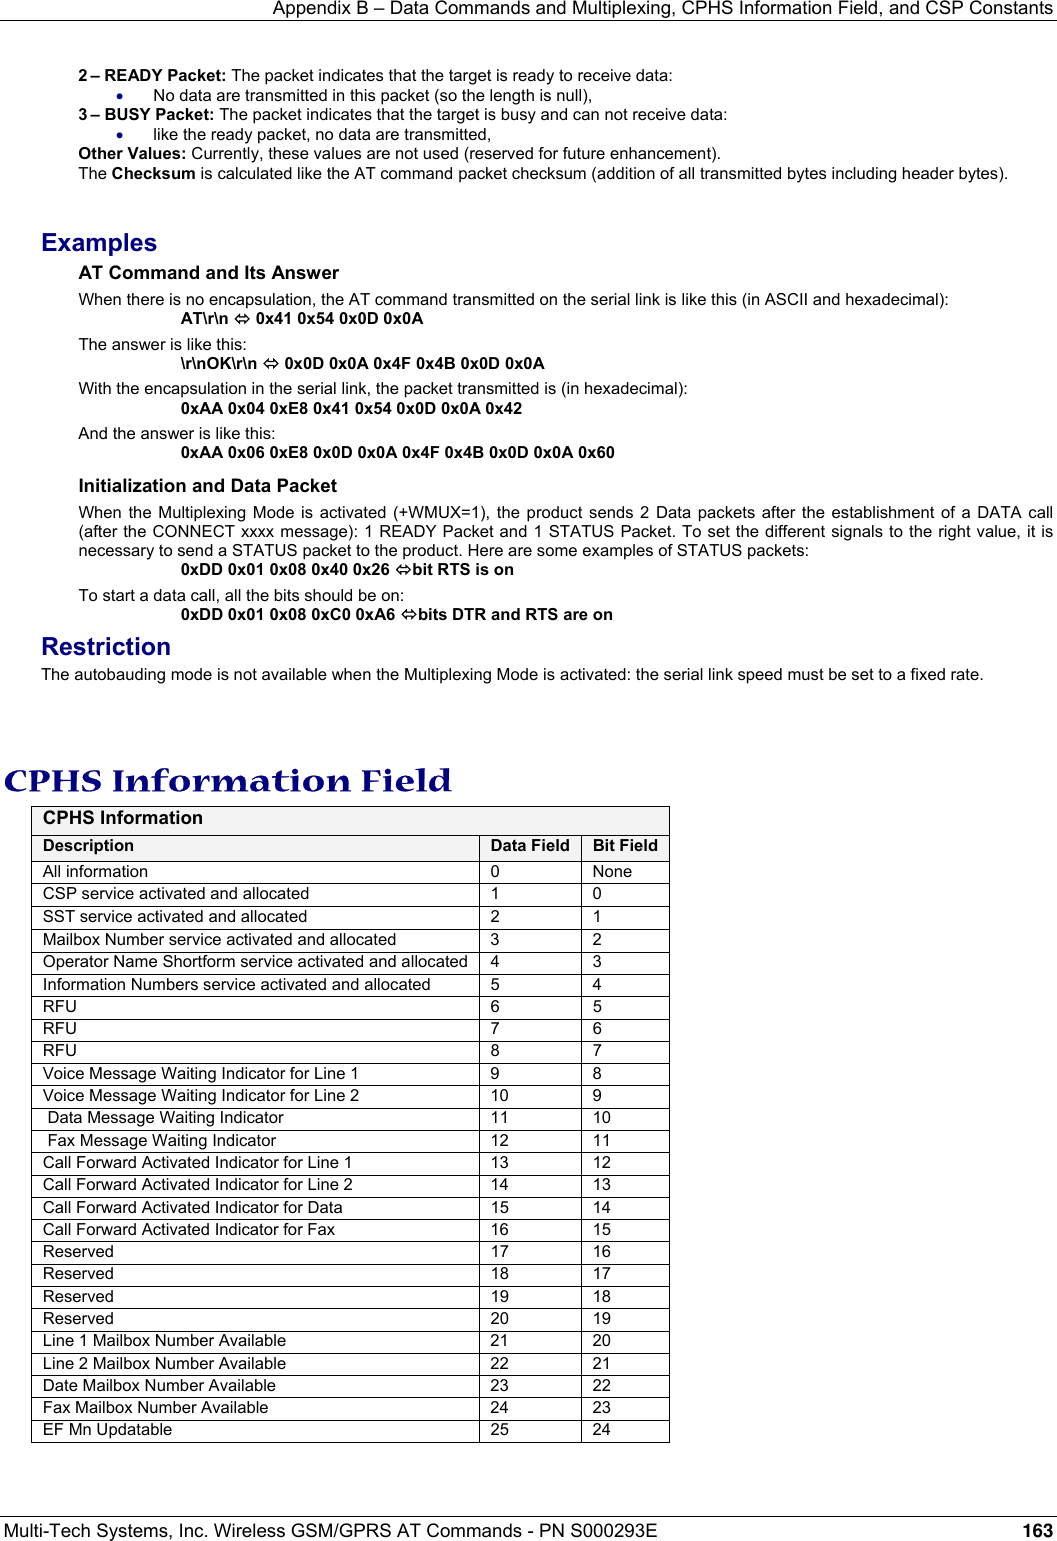 Appendix B – Data Commands and Multiplexing, CPHS Information Field, and CSP Constants Multi-Tech Systems, Inc. Wireless GSM/GPRS AT Commands - PN S000293E 163   2 – READY Packet: The packet indicates that the target is ready to receive data: • No data are transmitted in this packet (so the length is null), 3 – BUSY Packet: The packet indicates that the target is busy and can not receive data: • like the ready packet, no data are transmitted, Other Values: Currently, these values are not used (reserved for future enhancement). The Checksum is calculated like the AT command packet checksum (addition of all transmitted bytes including header bytes).   Examples AT Command and Its Answer When there is no encapsulation, the AT command transmitted on the serial link is like this (in ASCII and hexadecimal):  AT\r\n Ù 0x41 0x54 0x0D 0x0A The answer is like this:  \r\nOK\r\n Ù 0x0D 0x0A 0x4F 0x4B 0x0D 0x0A With the encapsulation in the serial link, the packet transmitted is (in hexadecimal):   0xAA 0x04 0xE8 0x41 0x54 0x0D 0x0A 0x42 And the answer is like this:   0xAA 0x06 0xE8 0x0D 0x0A 0x4F 0x4B 0x0D 0x0A 0x60 Initialization and Data Packet When the Multiplexing Mode is activated (+WMUX=1), the product sends 2 Data packets after the establishment of a DATA call (after the CONNECT xxxx message): 1 READY Packet and 1 STATUS Packet. To set the different signals to the right value, it is necessary to send a STATUS packet to the product. Here are some examples of STATUS packets:   0xDD 0x01 0x08 0x40 0x26 Ùbit RTS is on To start a data call, all the bits should be on:   0xDD 0x01 0x08 0xC0 0xA6 Ùbits DTR and RTS are on Restriction The autobauding mode is not available when the Multiplexing Mode is activated: the serial link speed must be set to a fixed rate.   CPHS Information Field CPHS Information Description  Data Field  Bit Field All information  0  None CSP service activated and allocated  1  0 SST service activated and allocated  2  1 Mailbox Number service activated and allocated  3  2 Operator Name Shortform service activated and allocated  4  3 Information Numbers service activated and allocated  5  4 RFU 6 5 RFU 7 6 RFU 8 7 Voice Message Waiting Indicator for Line 1  9  8 Voice Message Waiting Indicator for Line 2  10  9  Data Message Waiting Indicator  11  10  Fax Message Waiting Indicator  12  11 Call Forward Activated Indicator for Line 1  13  12 Call Forward Activated Indicator for Line 2  14  13 Call Forward Activated Indicator for Data  15  14 Call Forward Activated Indicator for Fax  16  15 Reserved 17 16 Reserved 18 17 Reserved 19 18 Reserved 20 19 Line 1 Mailbox Number Available  21  20 Line 2 Mailbox Number Available  22  21 Date Mailbox Number Available  23  22 Fax Mailbox Number Available  24  23 EF Mn Updatable  25  24   